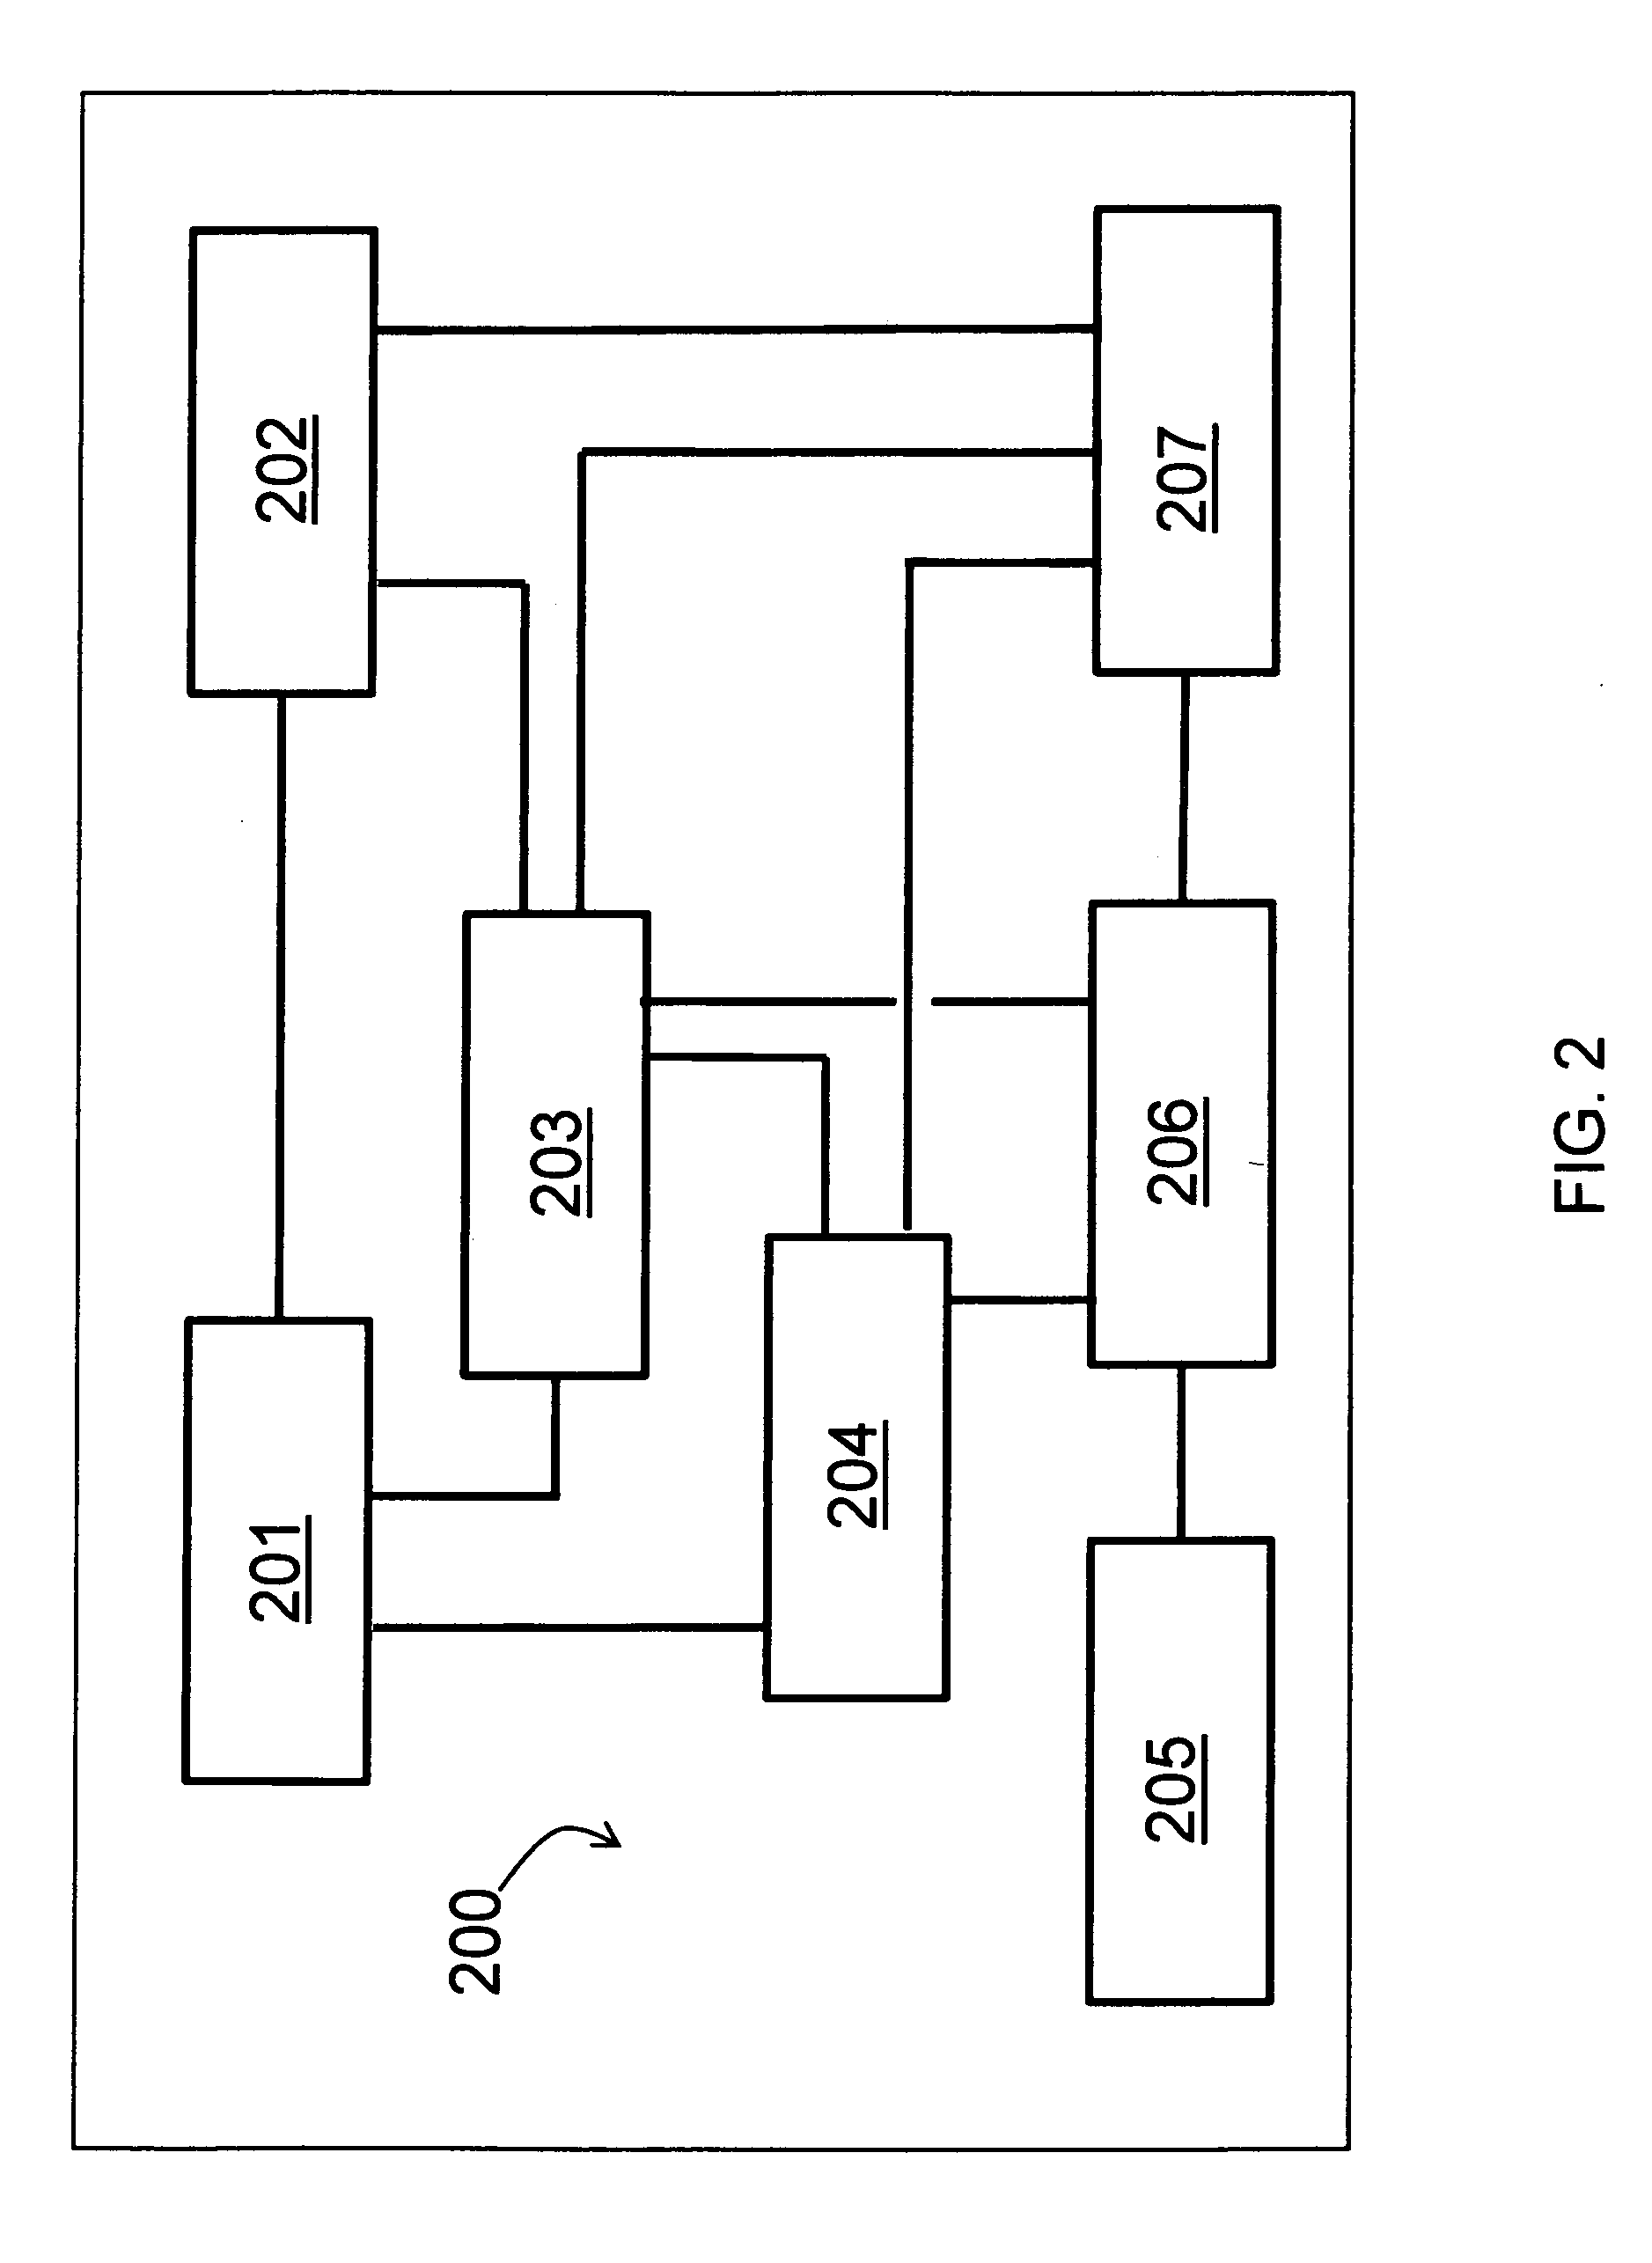 Automated research systems and methods for researching systems